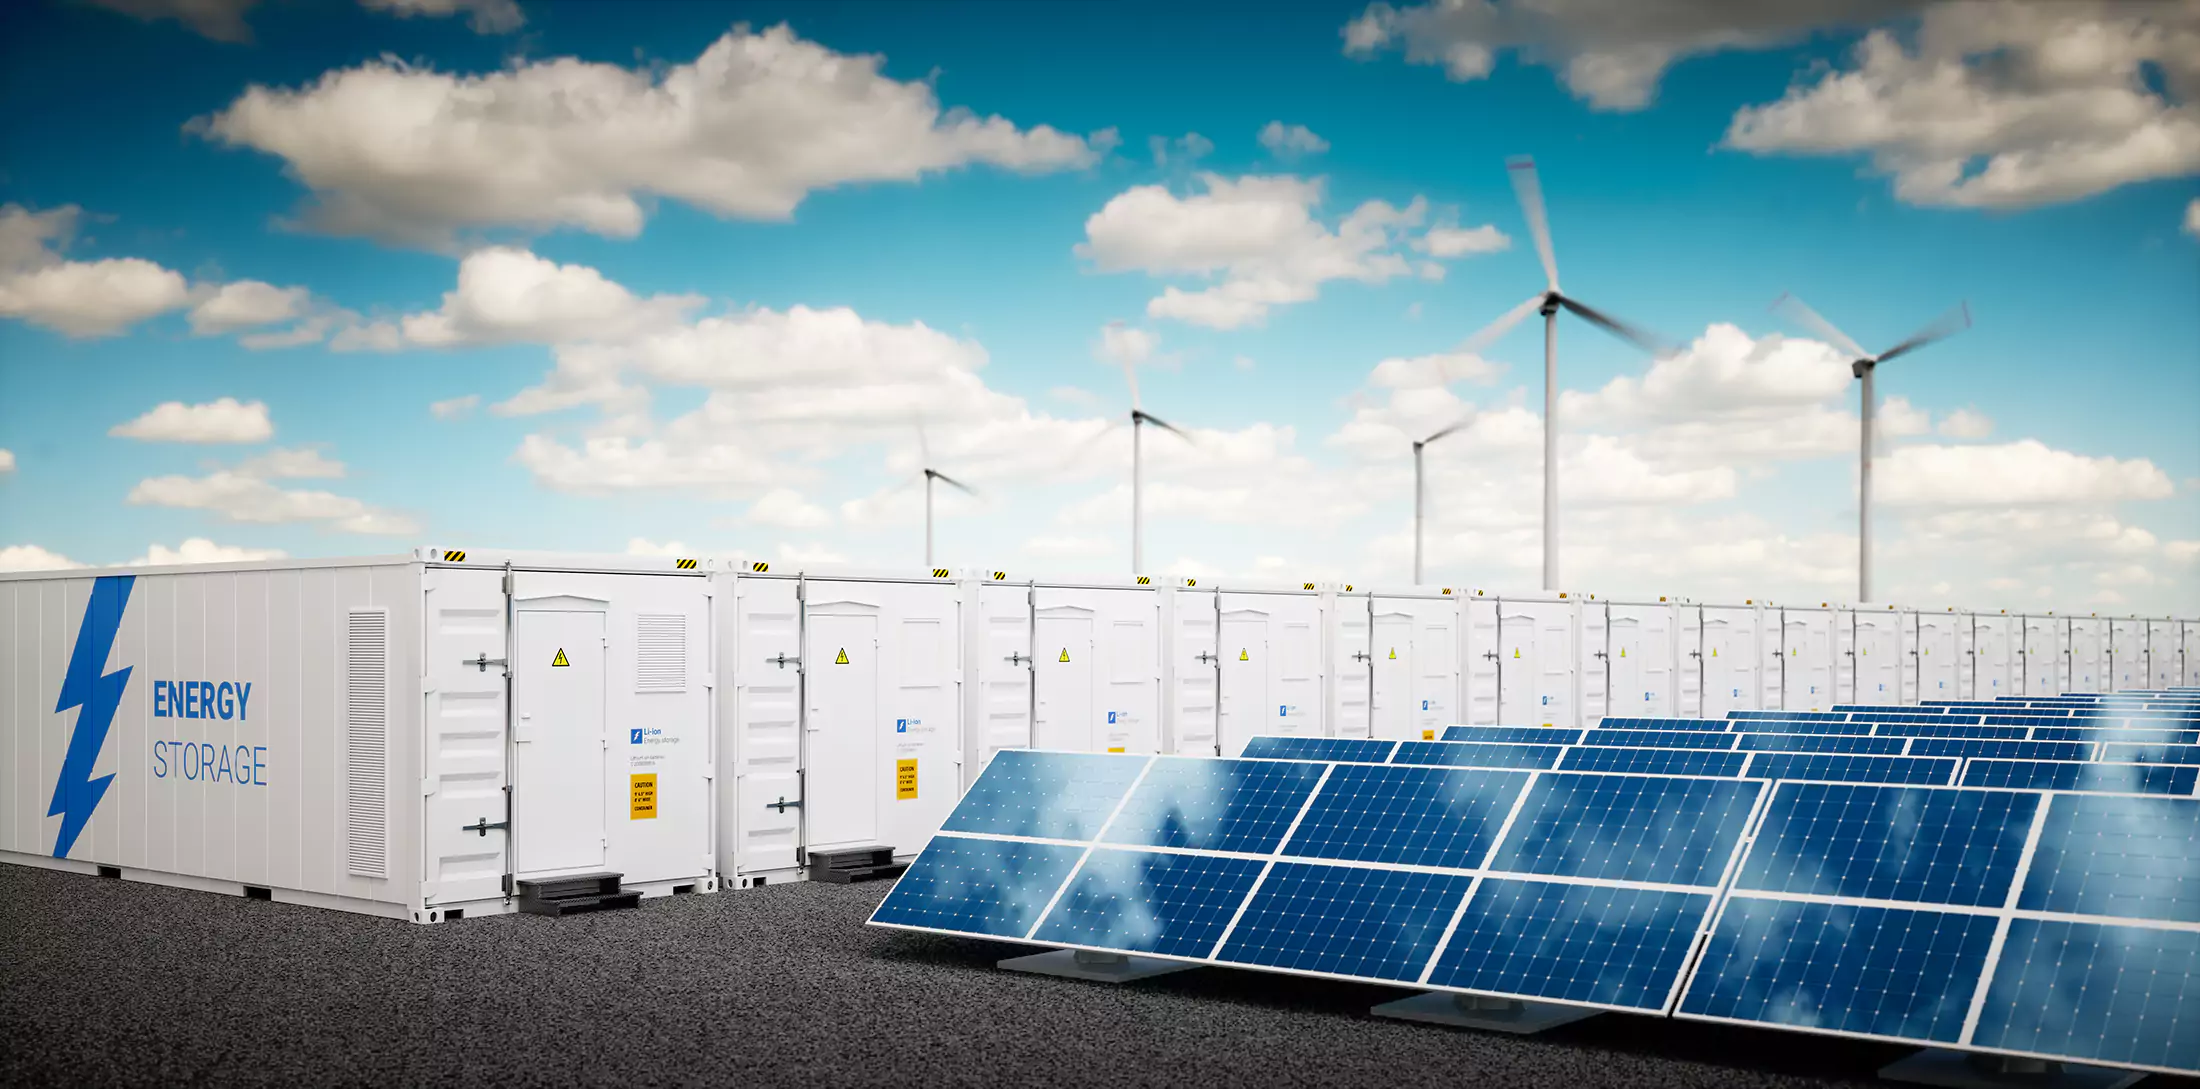 recycling modernisation fund, Solar panels and energy storage - part of the modern cleantech initiative